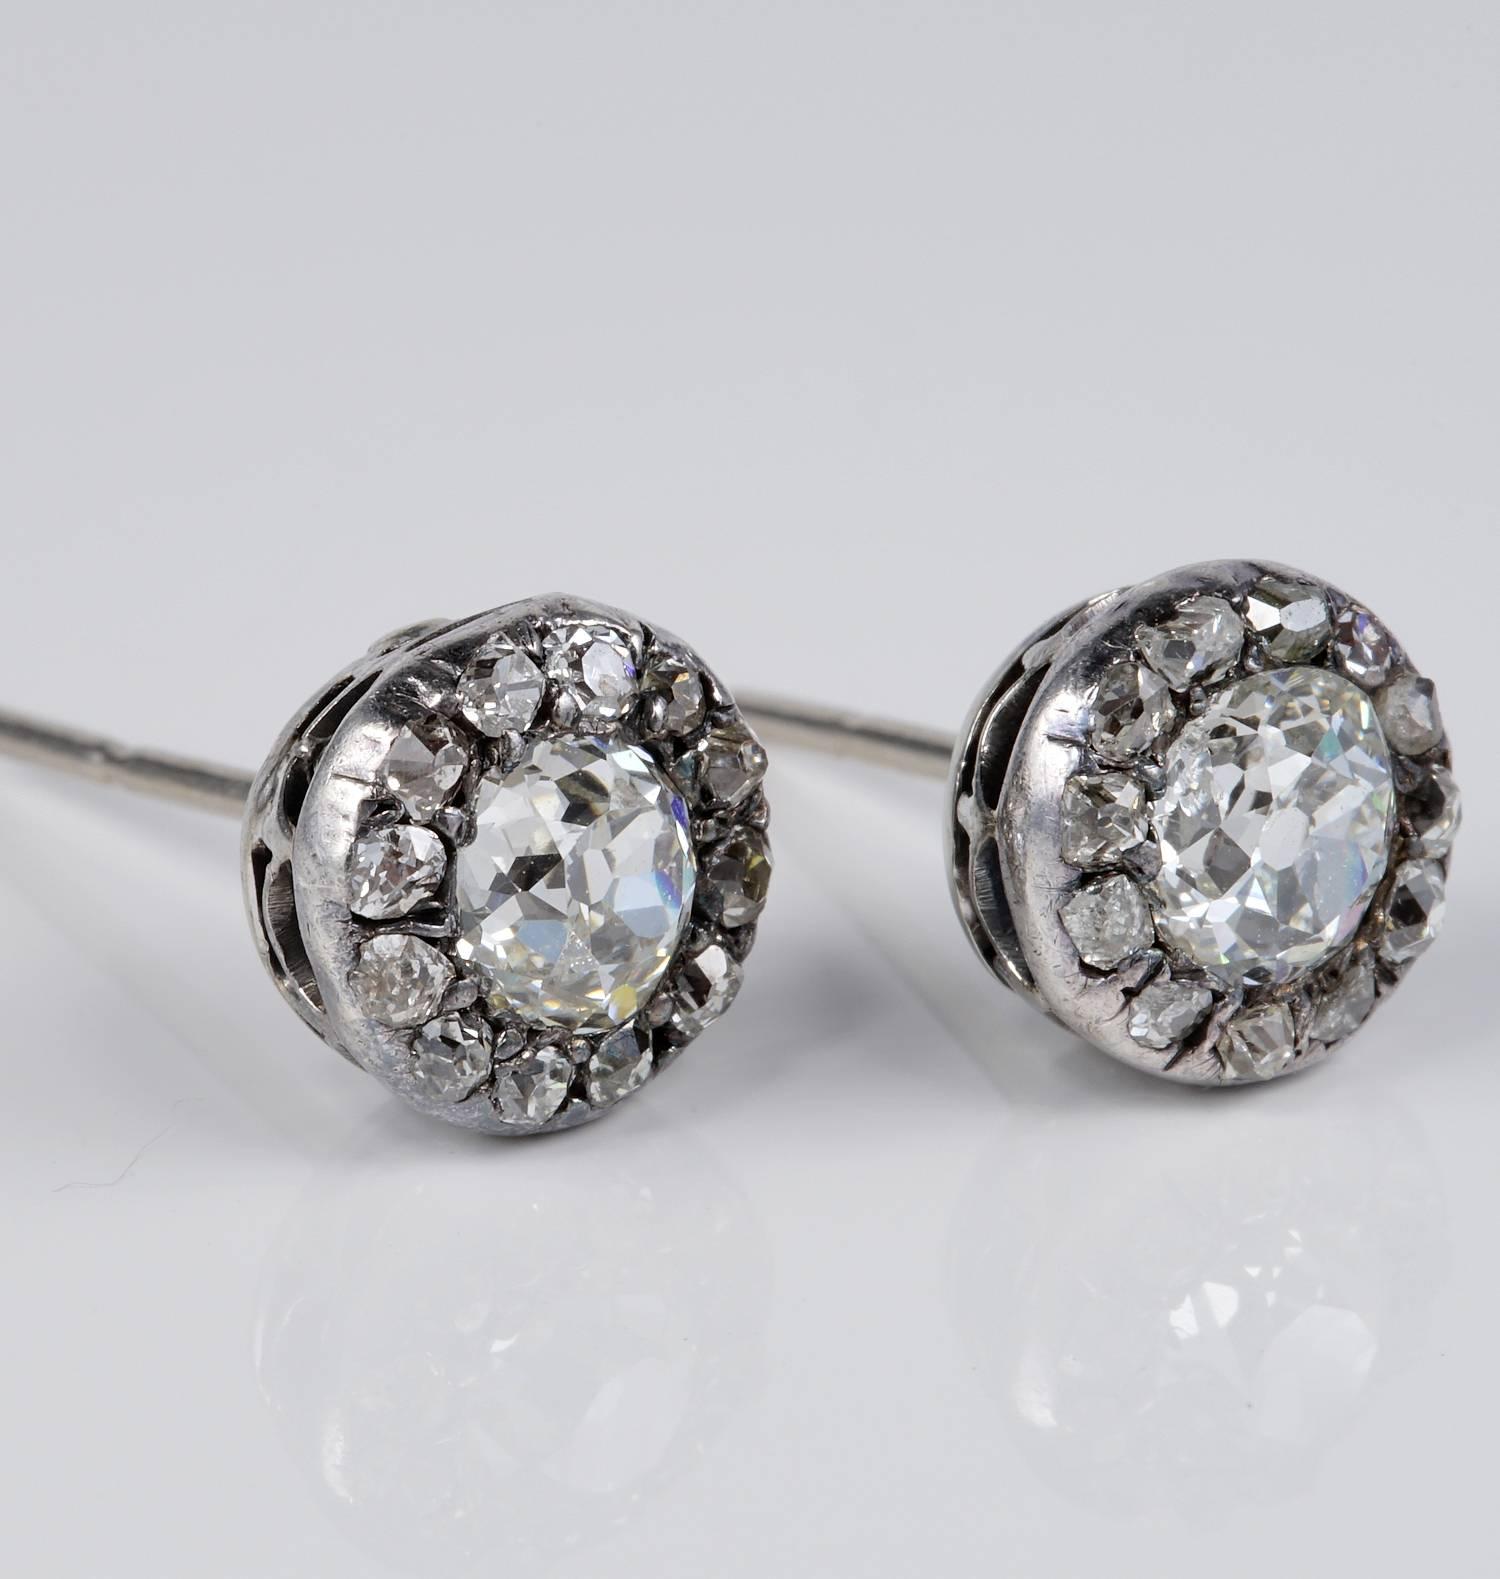 Beautiful behind every belief, so rare and scarce in trade
These step into back jewellery history
Stunning early Victorian studs all original and terrific
The perfect pair to have stuck on ears all day long easy wear and exclusive
Exquisite mounting